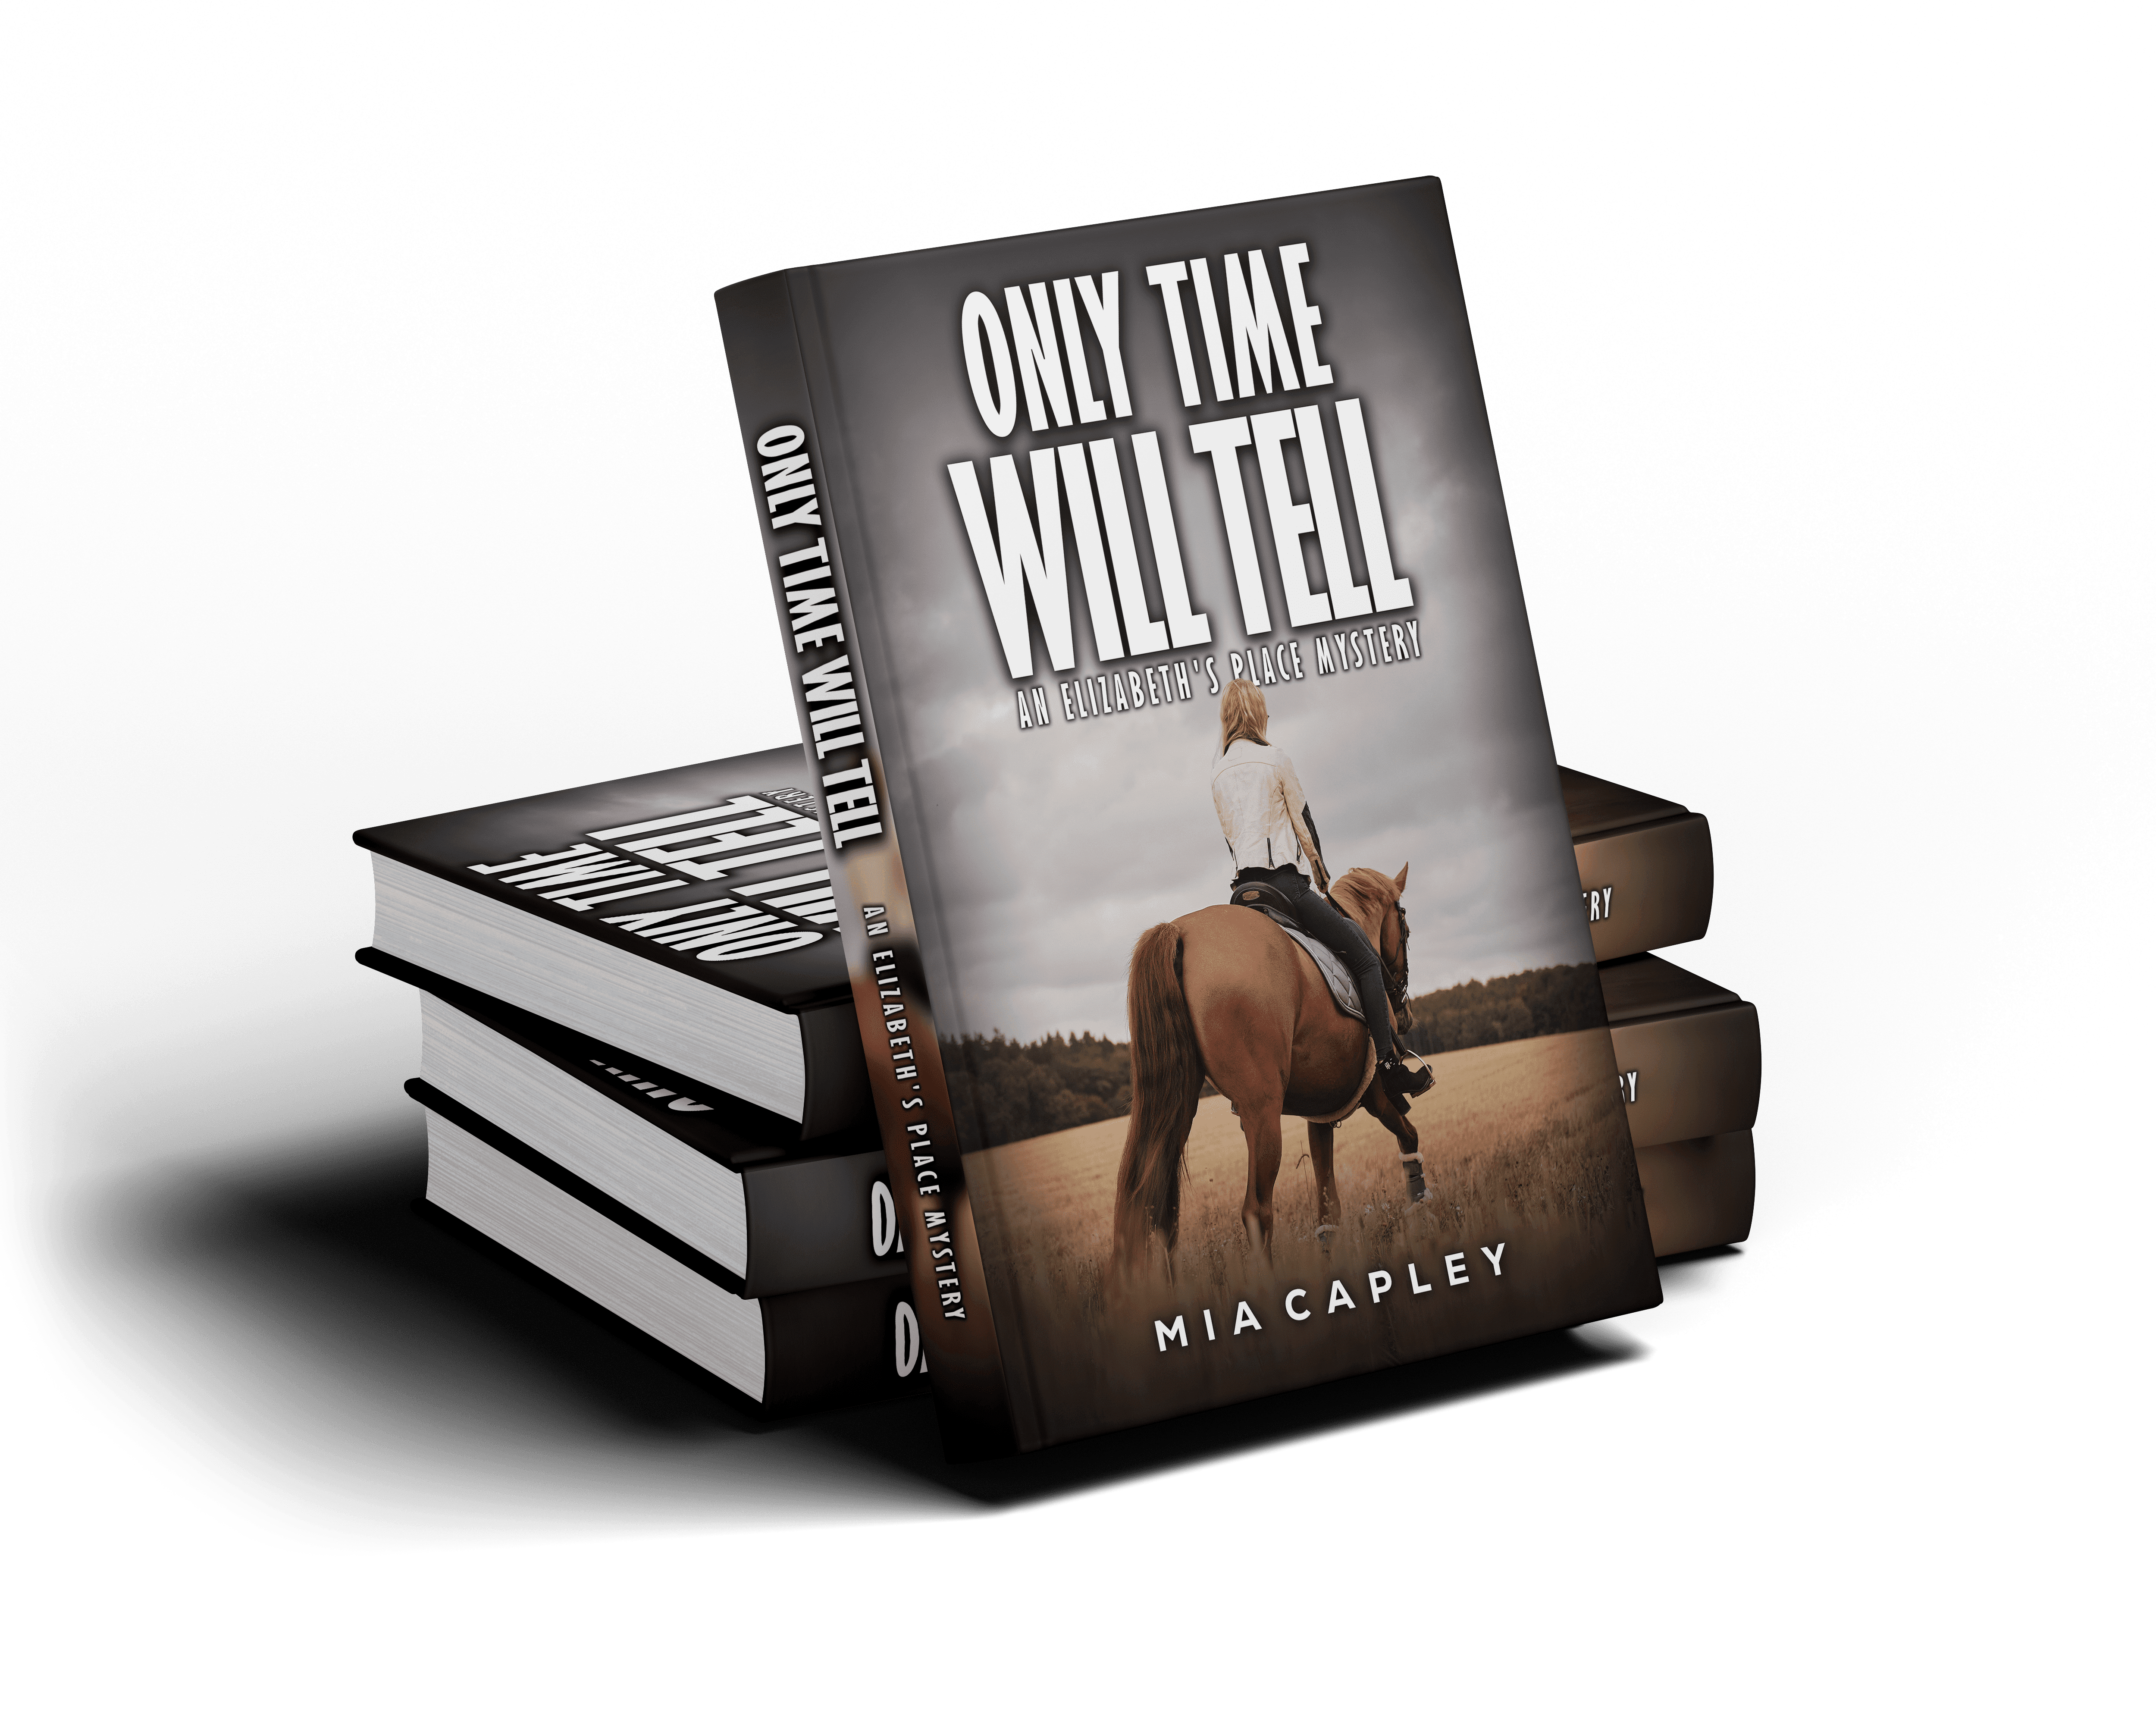 Cover of 'Only Time Will Tell' by McKenzie McCoy - A captivating book cover with bold typography and a mysterious background image.